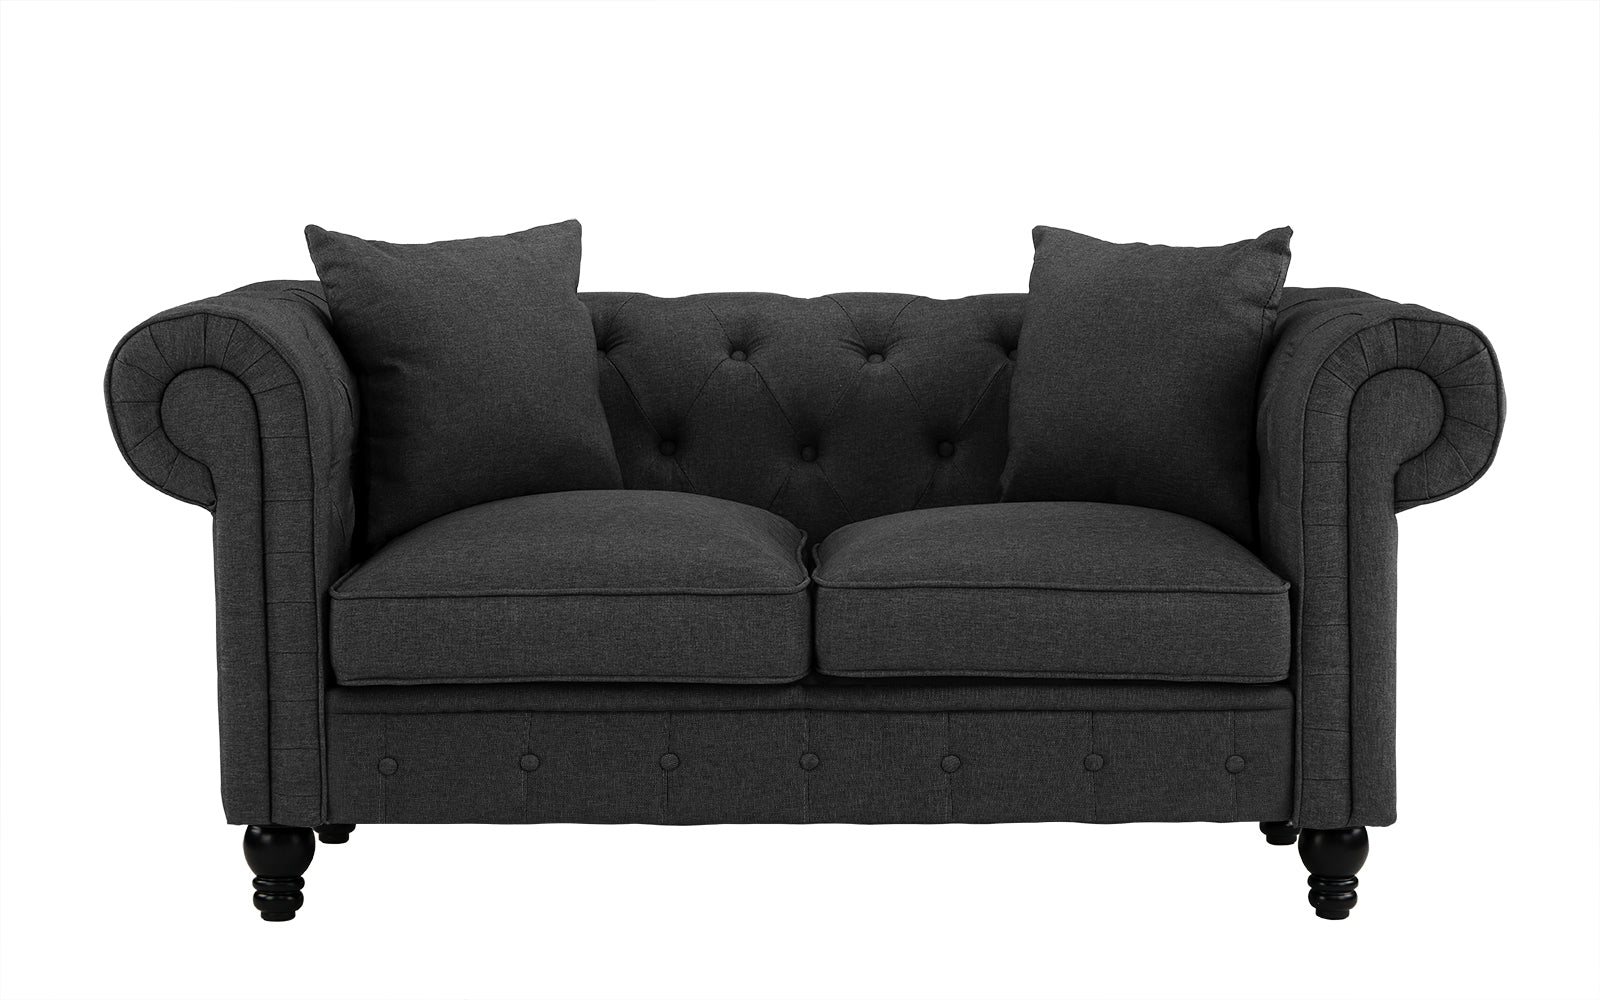 Easton Classic Scroll Arm Victorian Chesterfield Loveseat